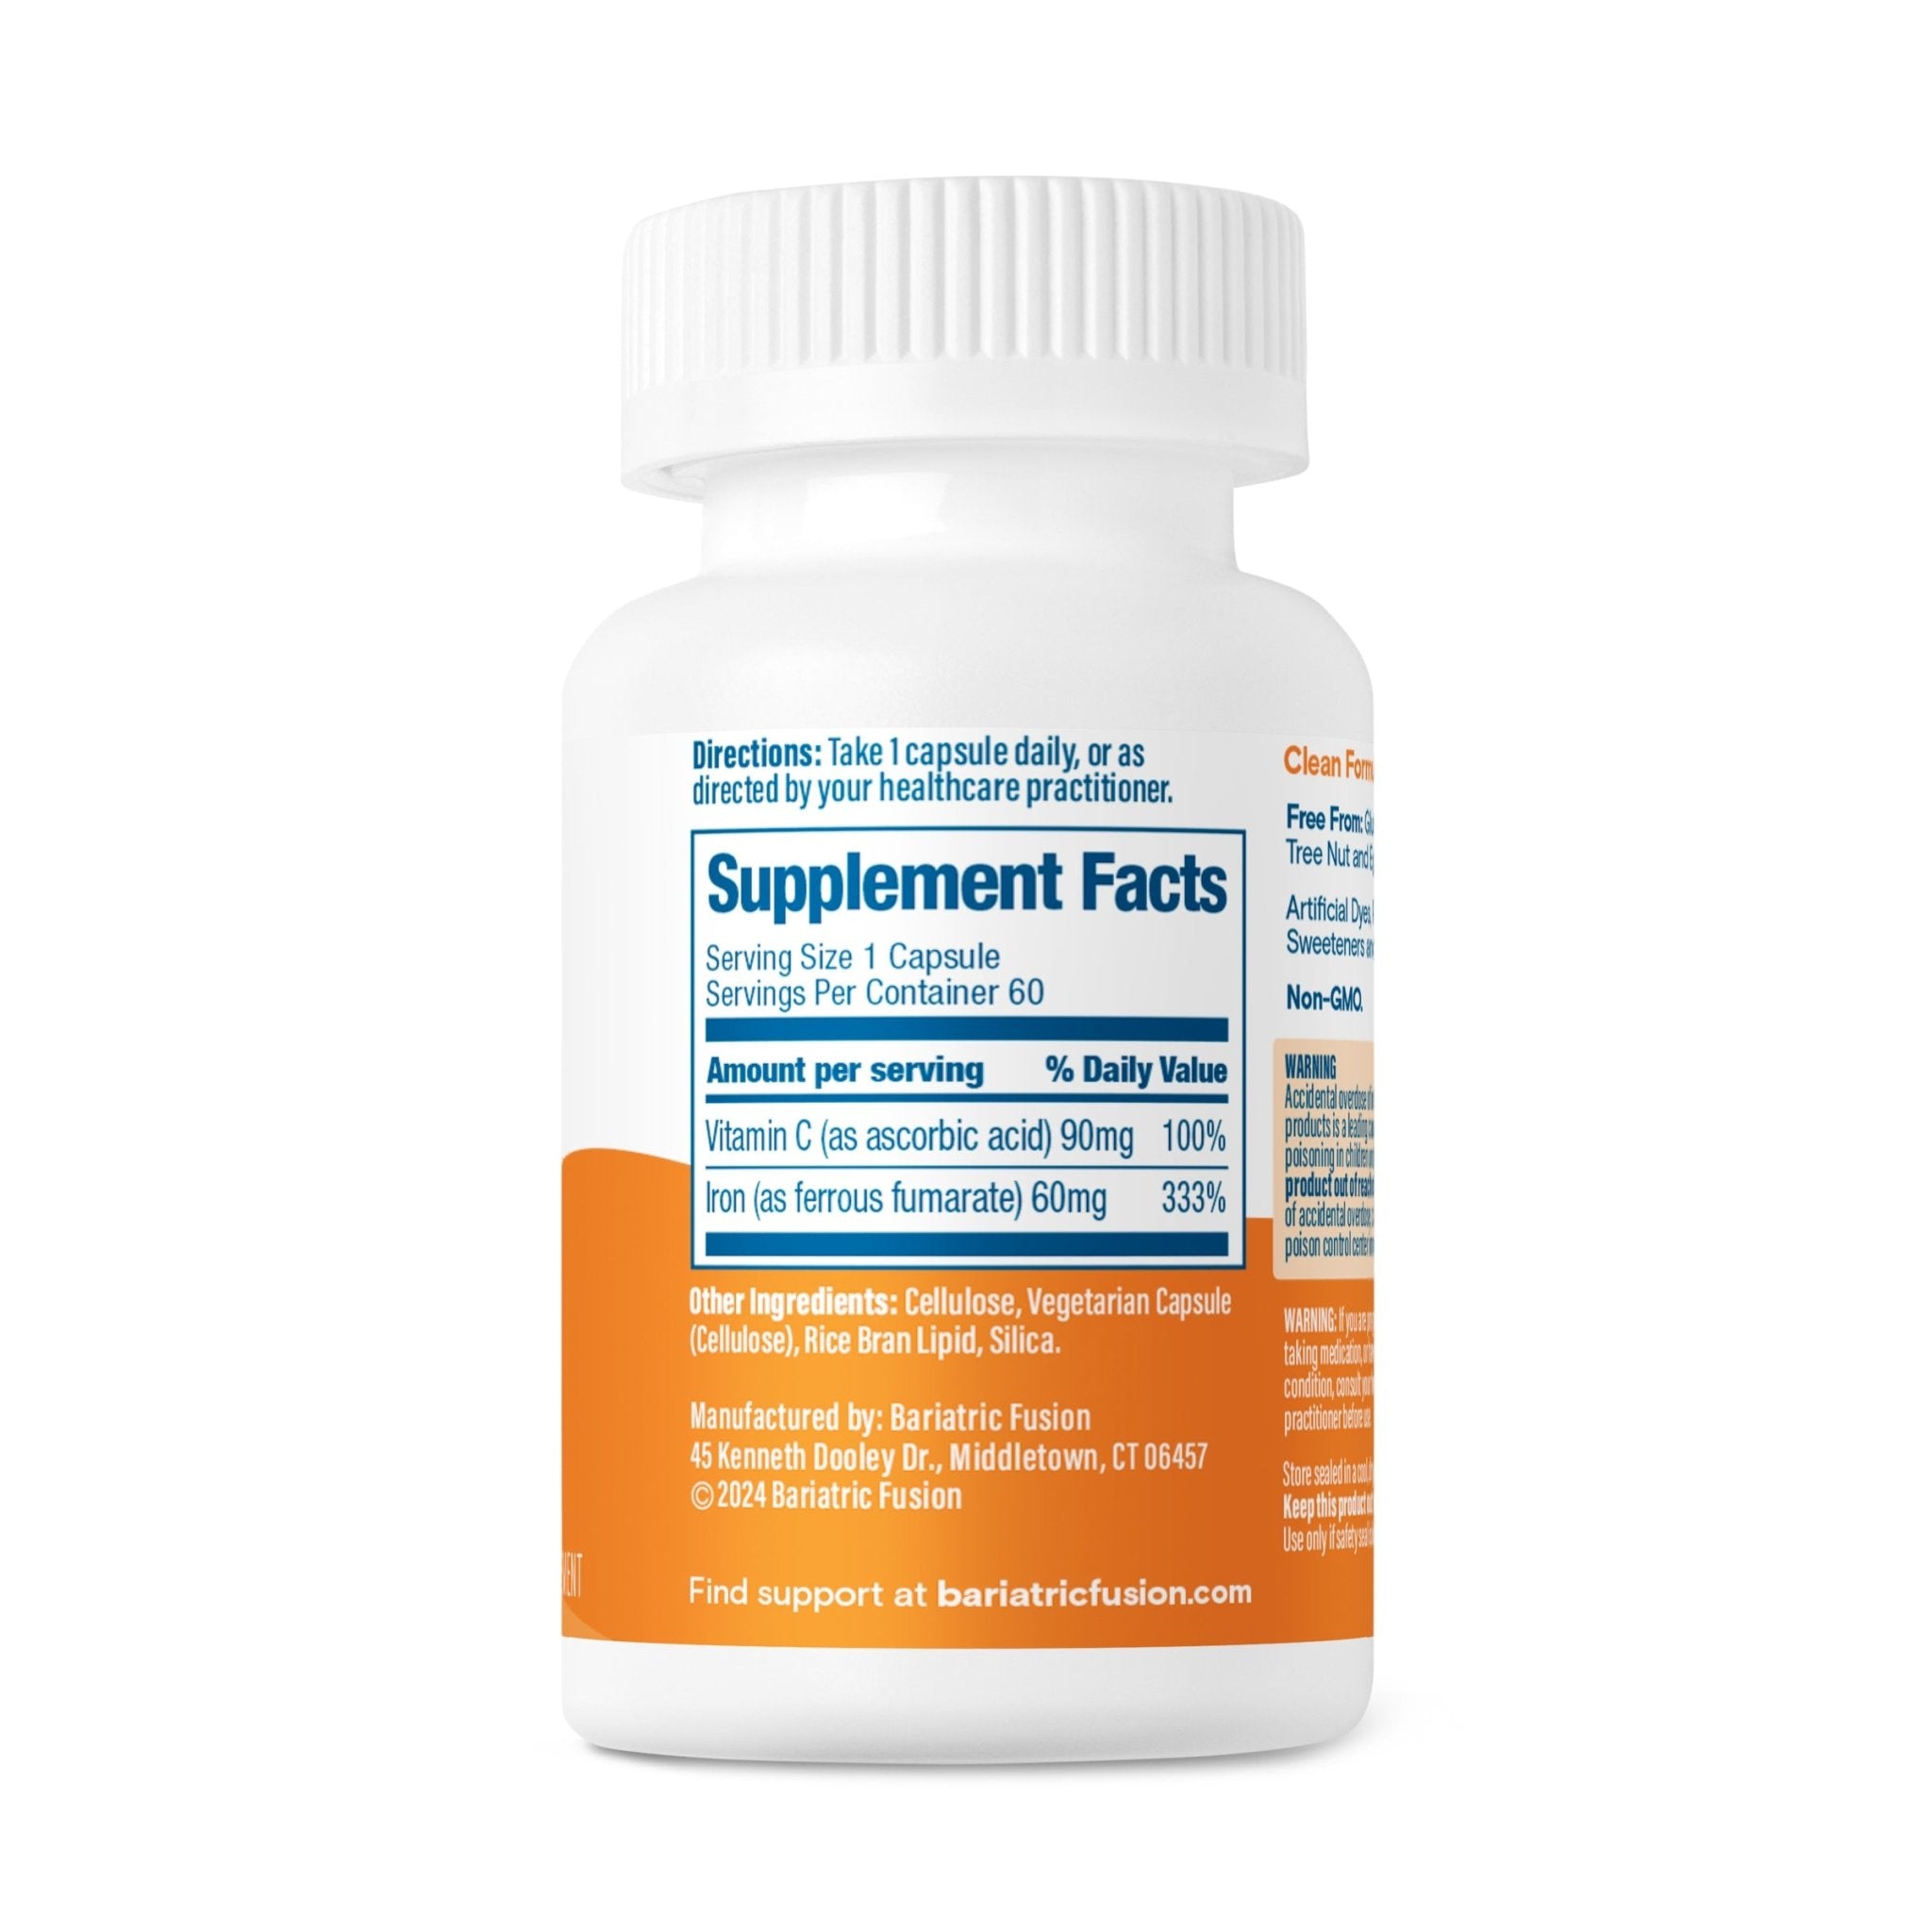 Bariatric Iron Capsule with Vitamin C 60mg Iron directions, servings, and other ingredients.